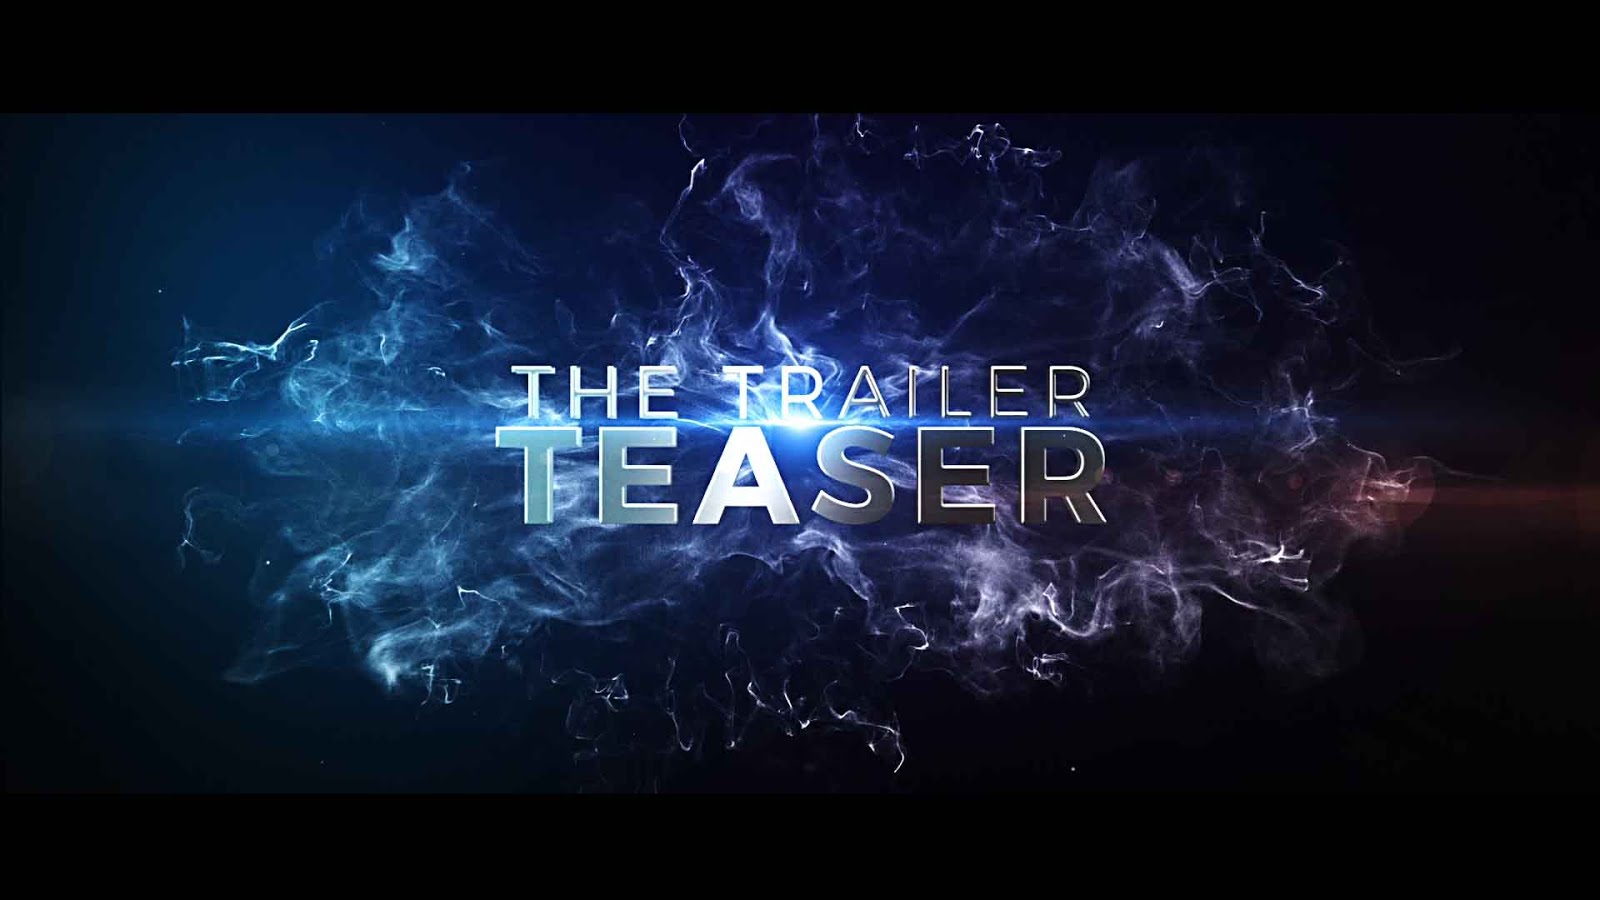  After  Effects  Template  The Trailer Teaser gosharemore 